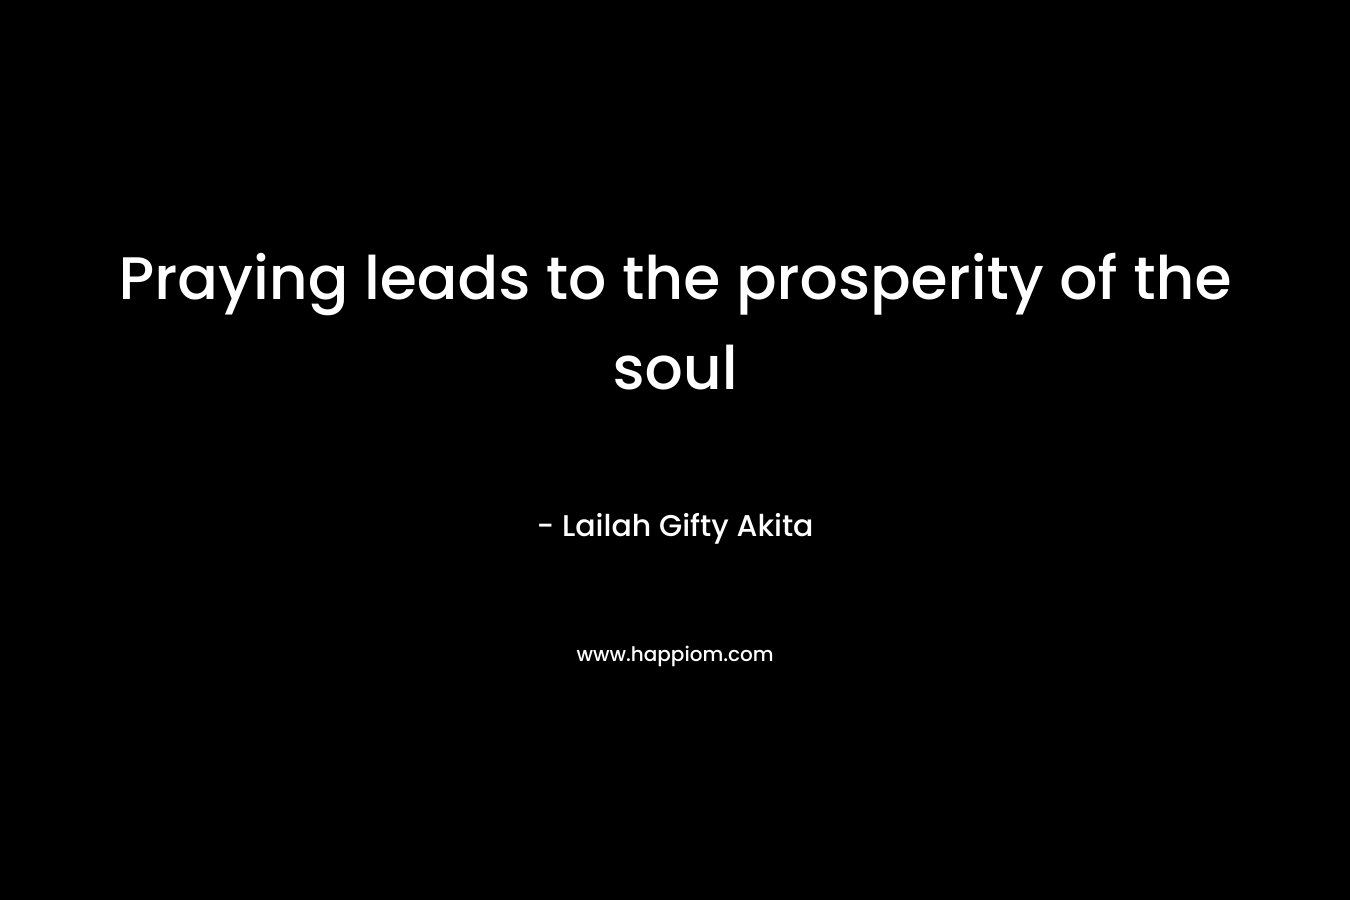 Praying leads to the prosperity of the soul